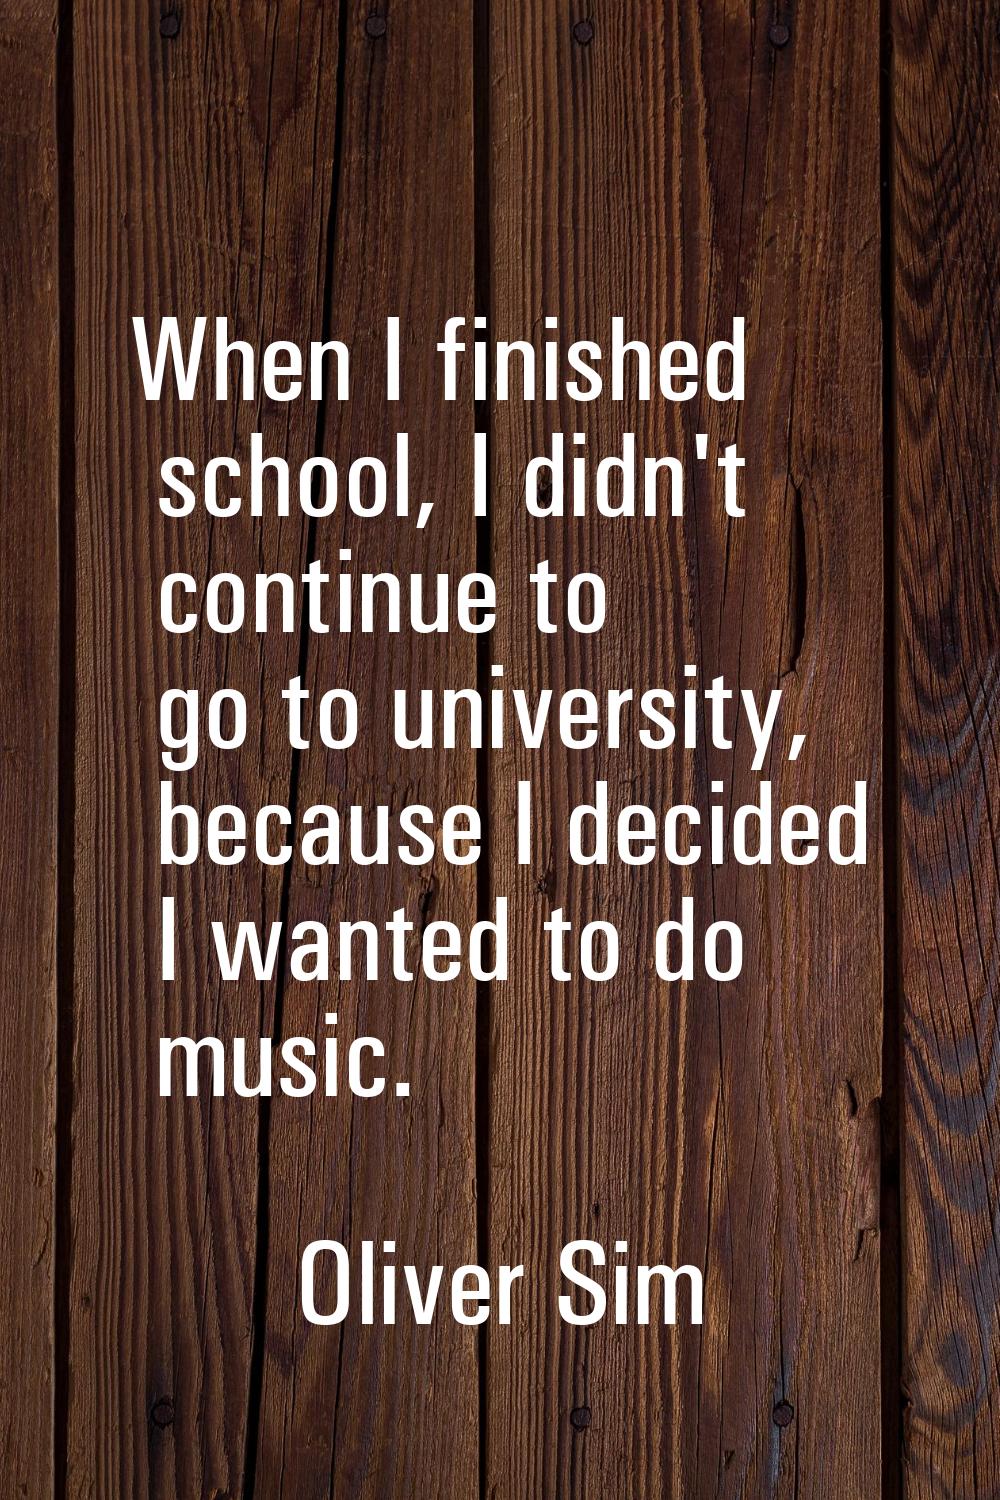 When I finished school, I didn't continue to go to university, because I decided I wanted to do mus